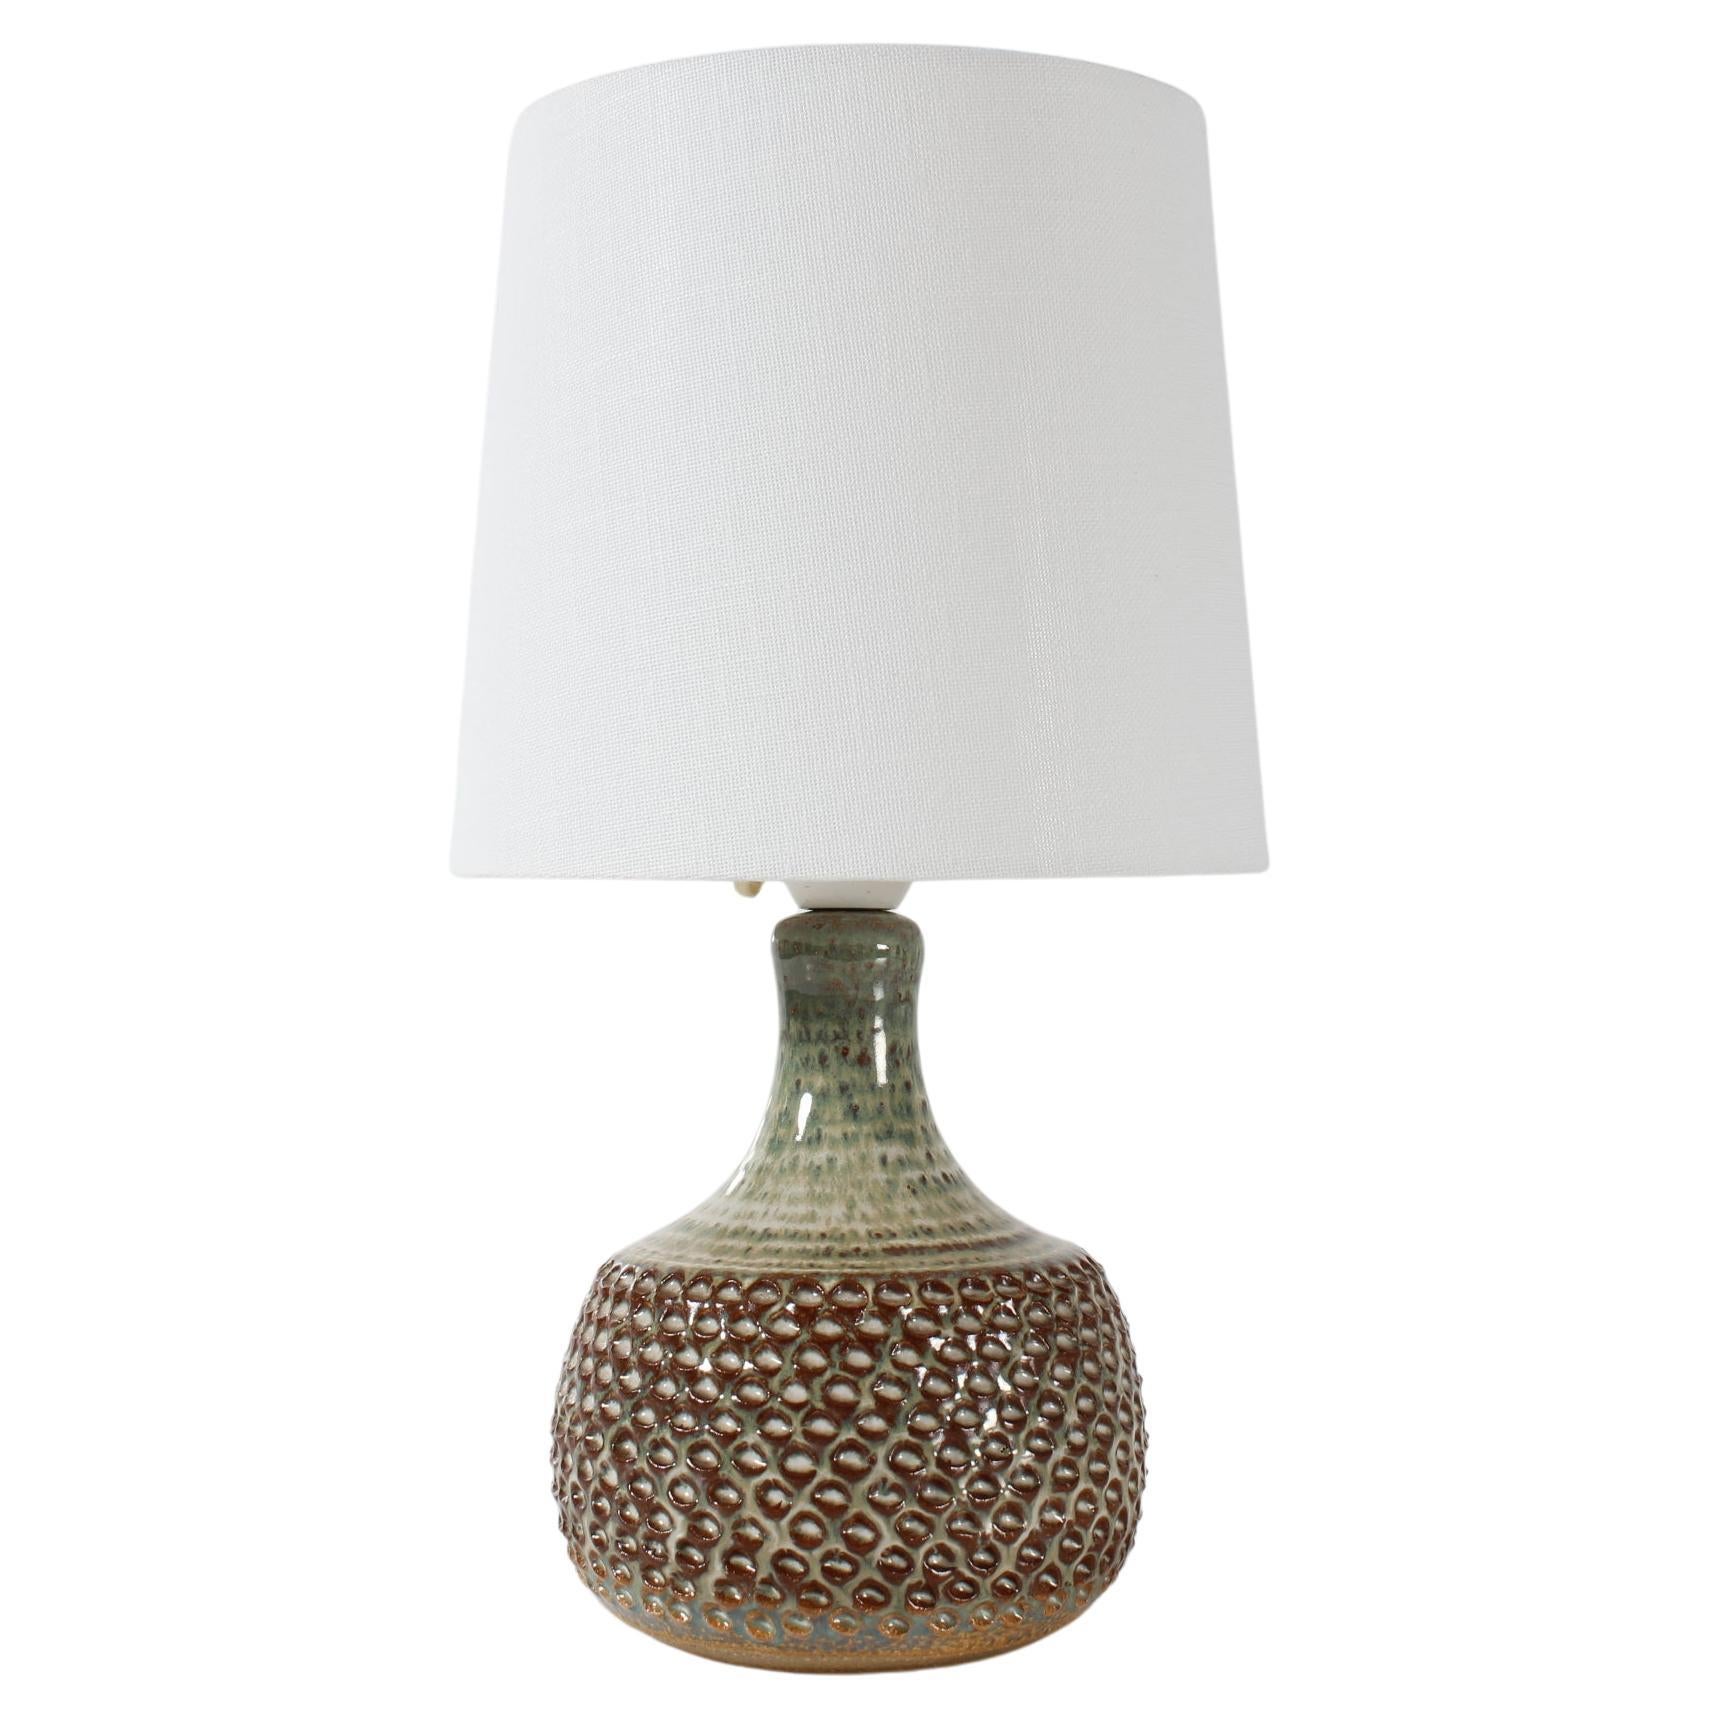 Danish Arstistic Ceramic Table Lamp from the 60s with New Shade made in Denmark For Sale